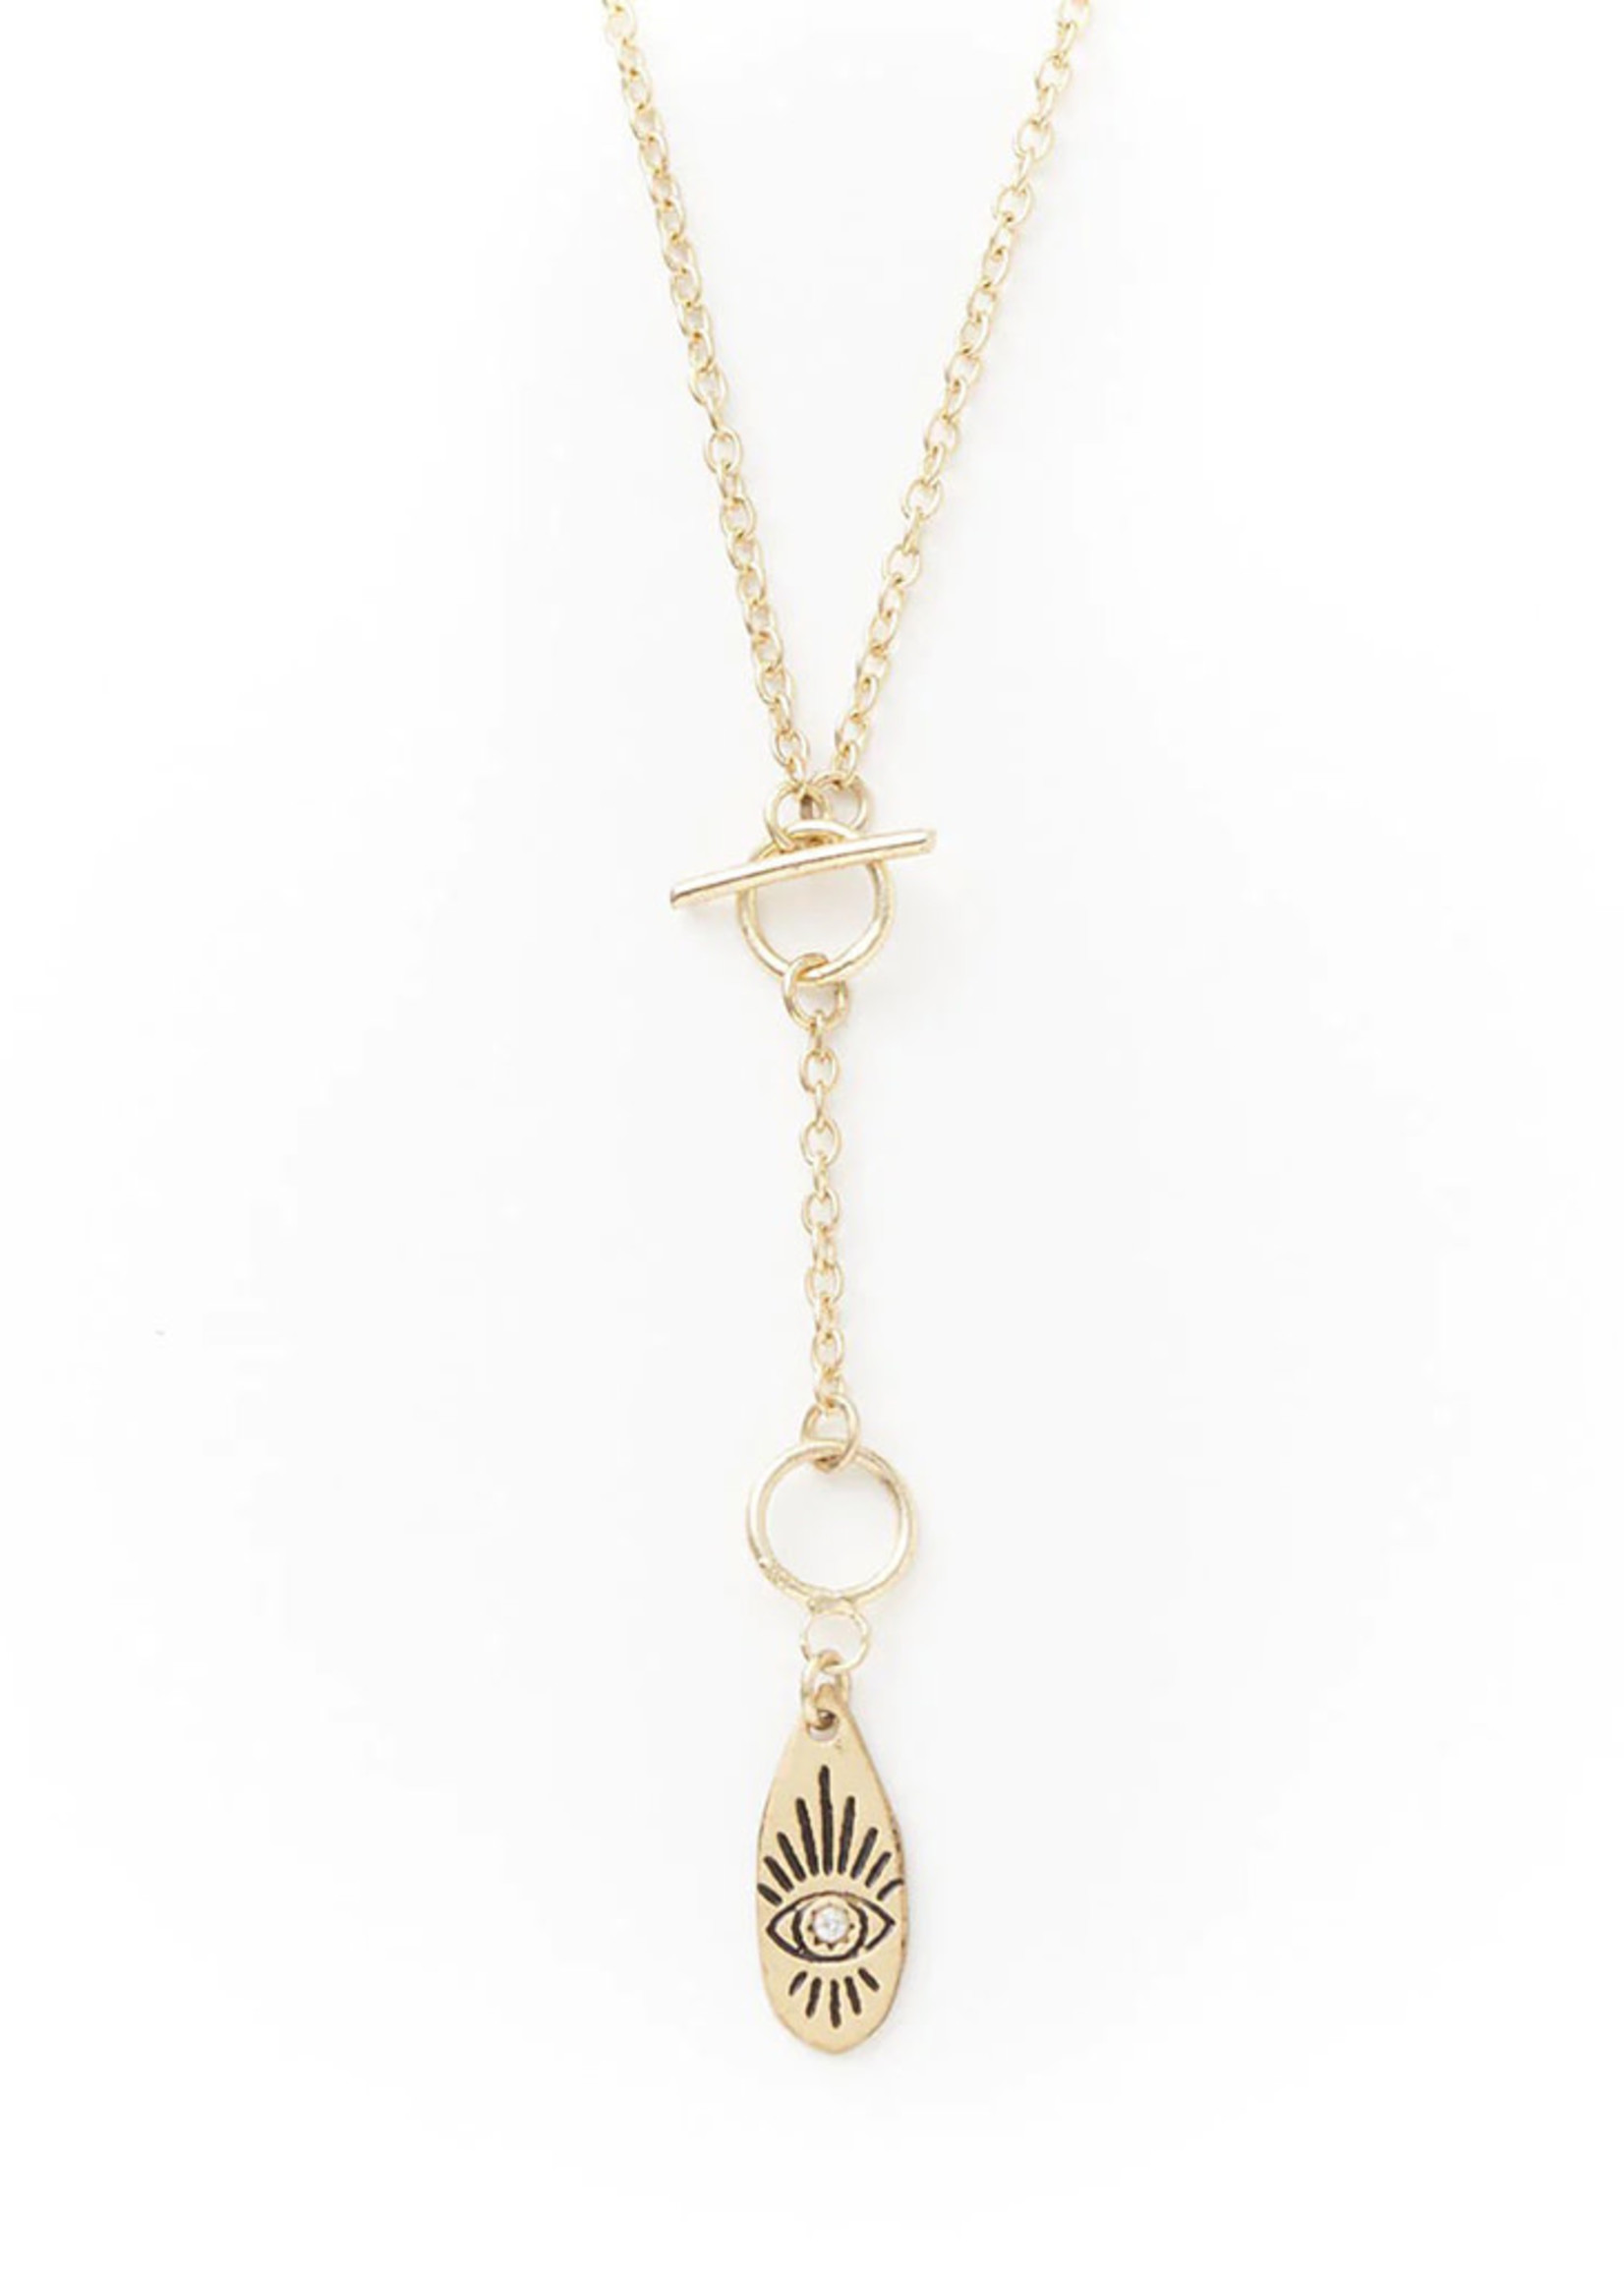 Matr Boomie Ruchi Lariat with Evil Eye Charm Necklace